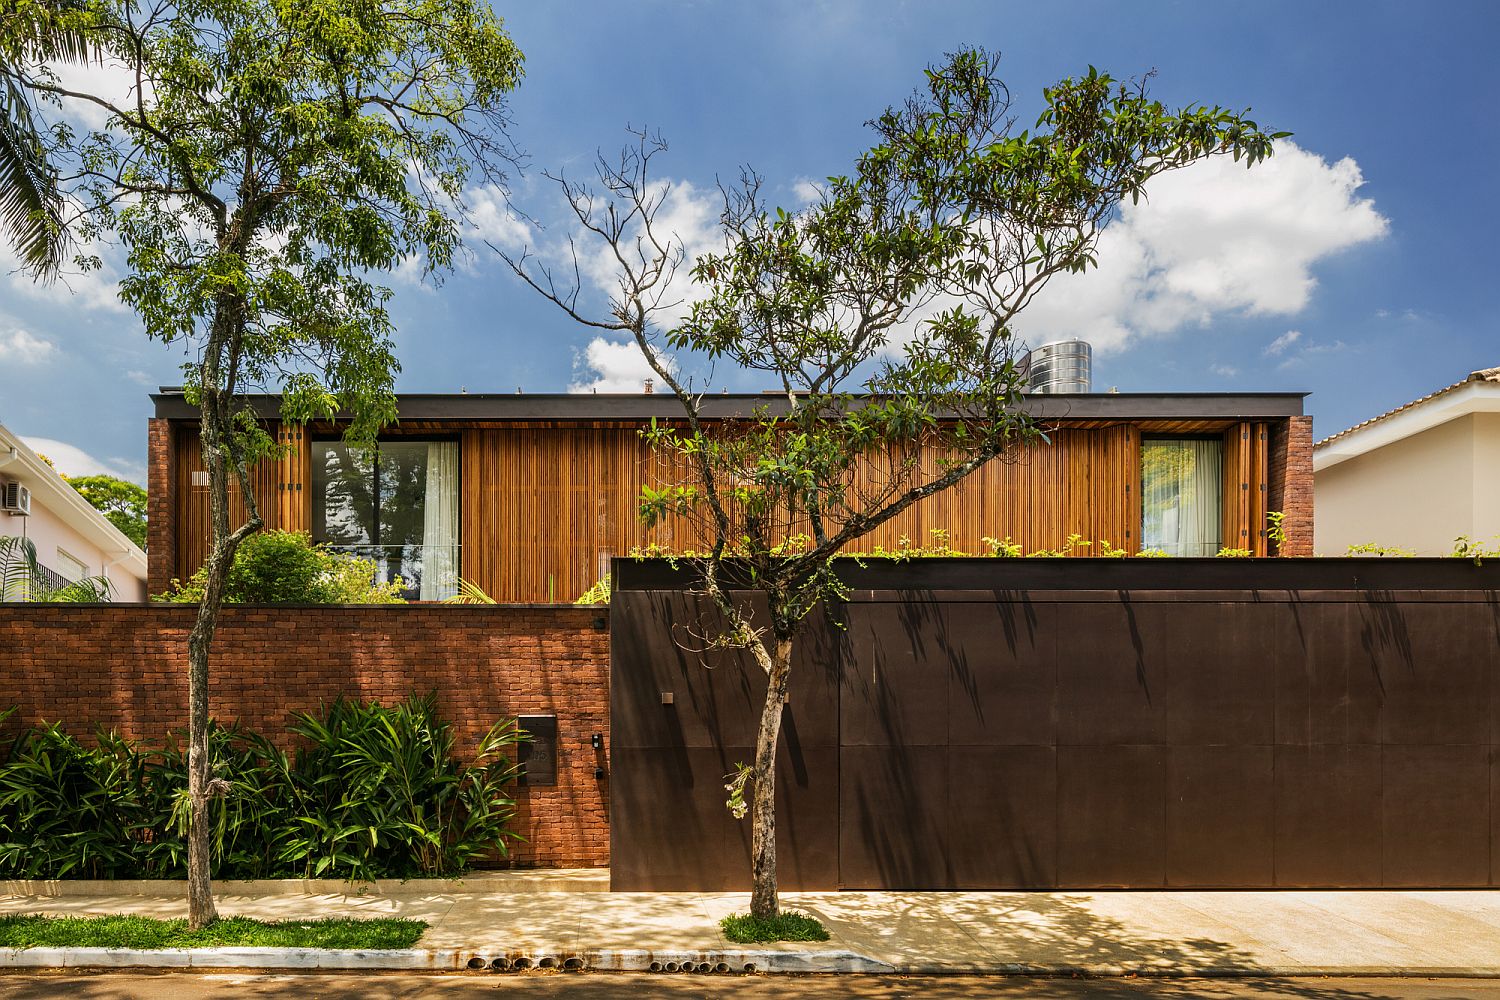 Private street facade of the Sao Paulo Residence in wood and steel